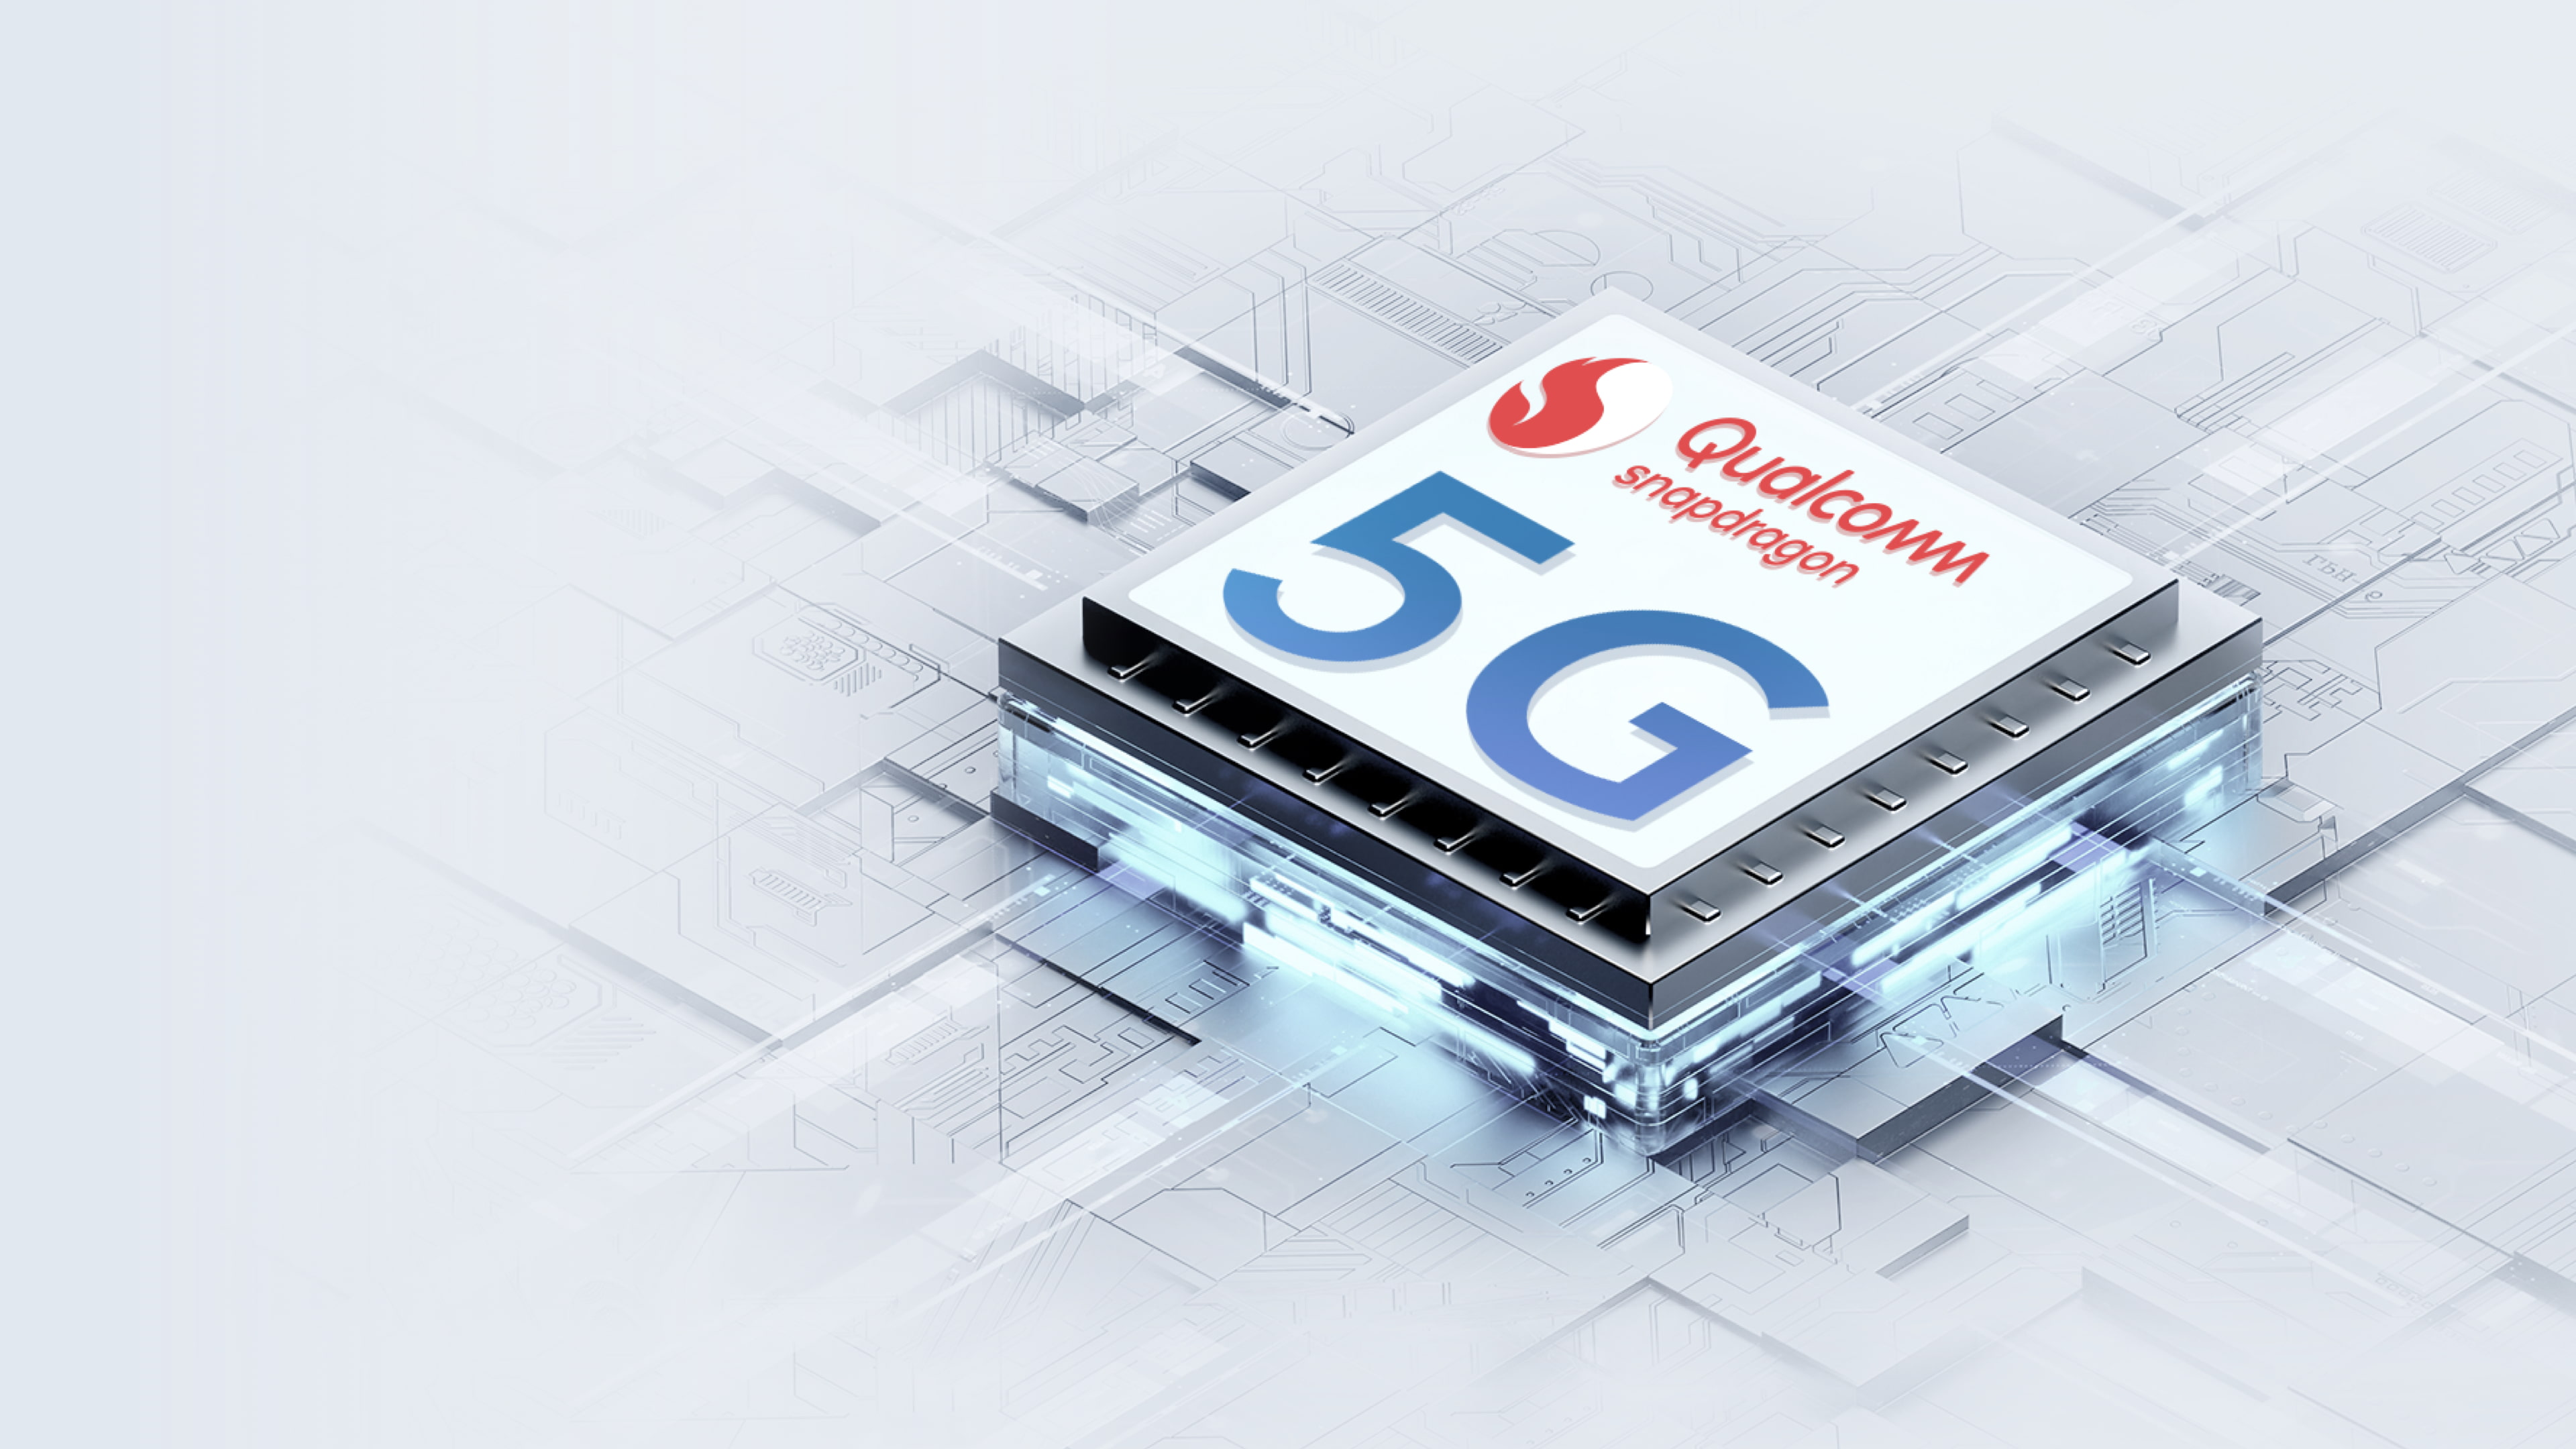 Qualcomm Snapdragon 5G Soc, eXtra Speed, eXtra Strength, eXtra achieved.1GB download for only 10 seconds3
